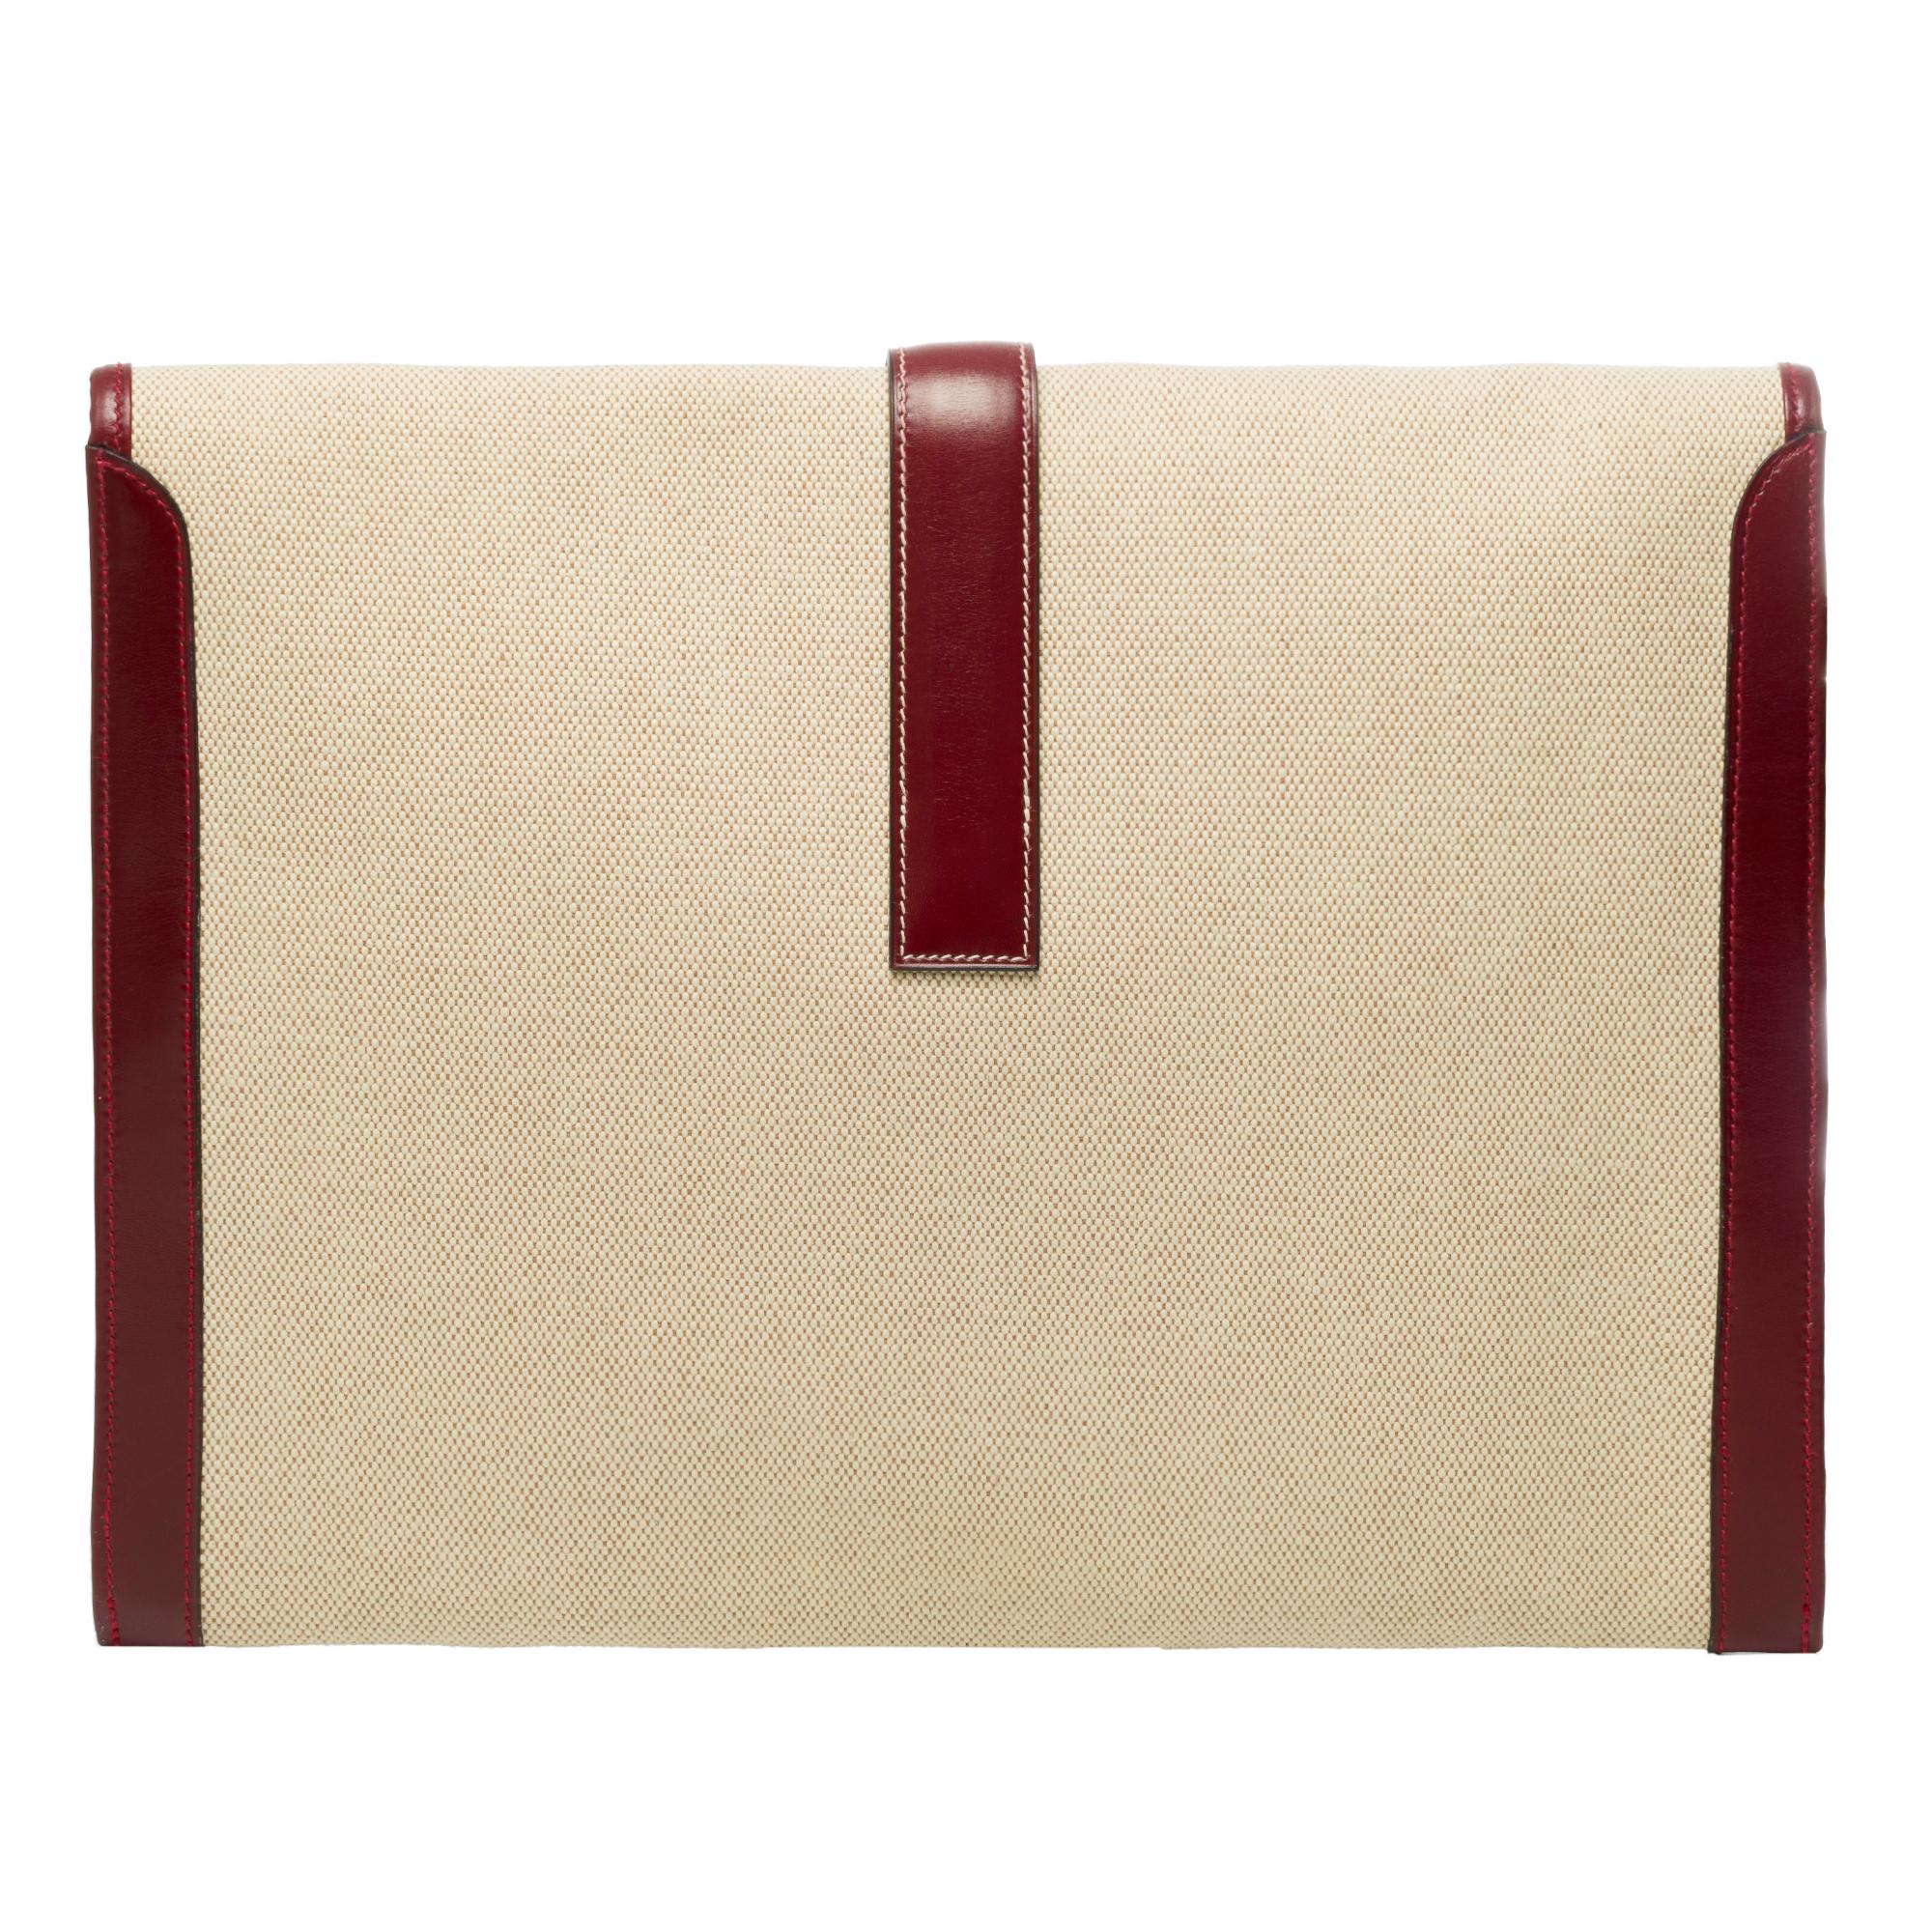 Beautiful Hermes Jige pouch large model bi-material in beige canvas and burgundy box leather, white stitching, handheld.

H closure on flap.
Lining in beige canvas.
Signature: 